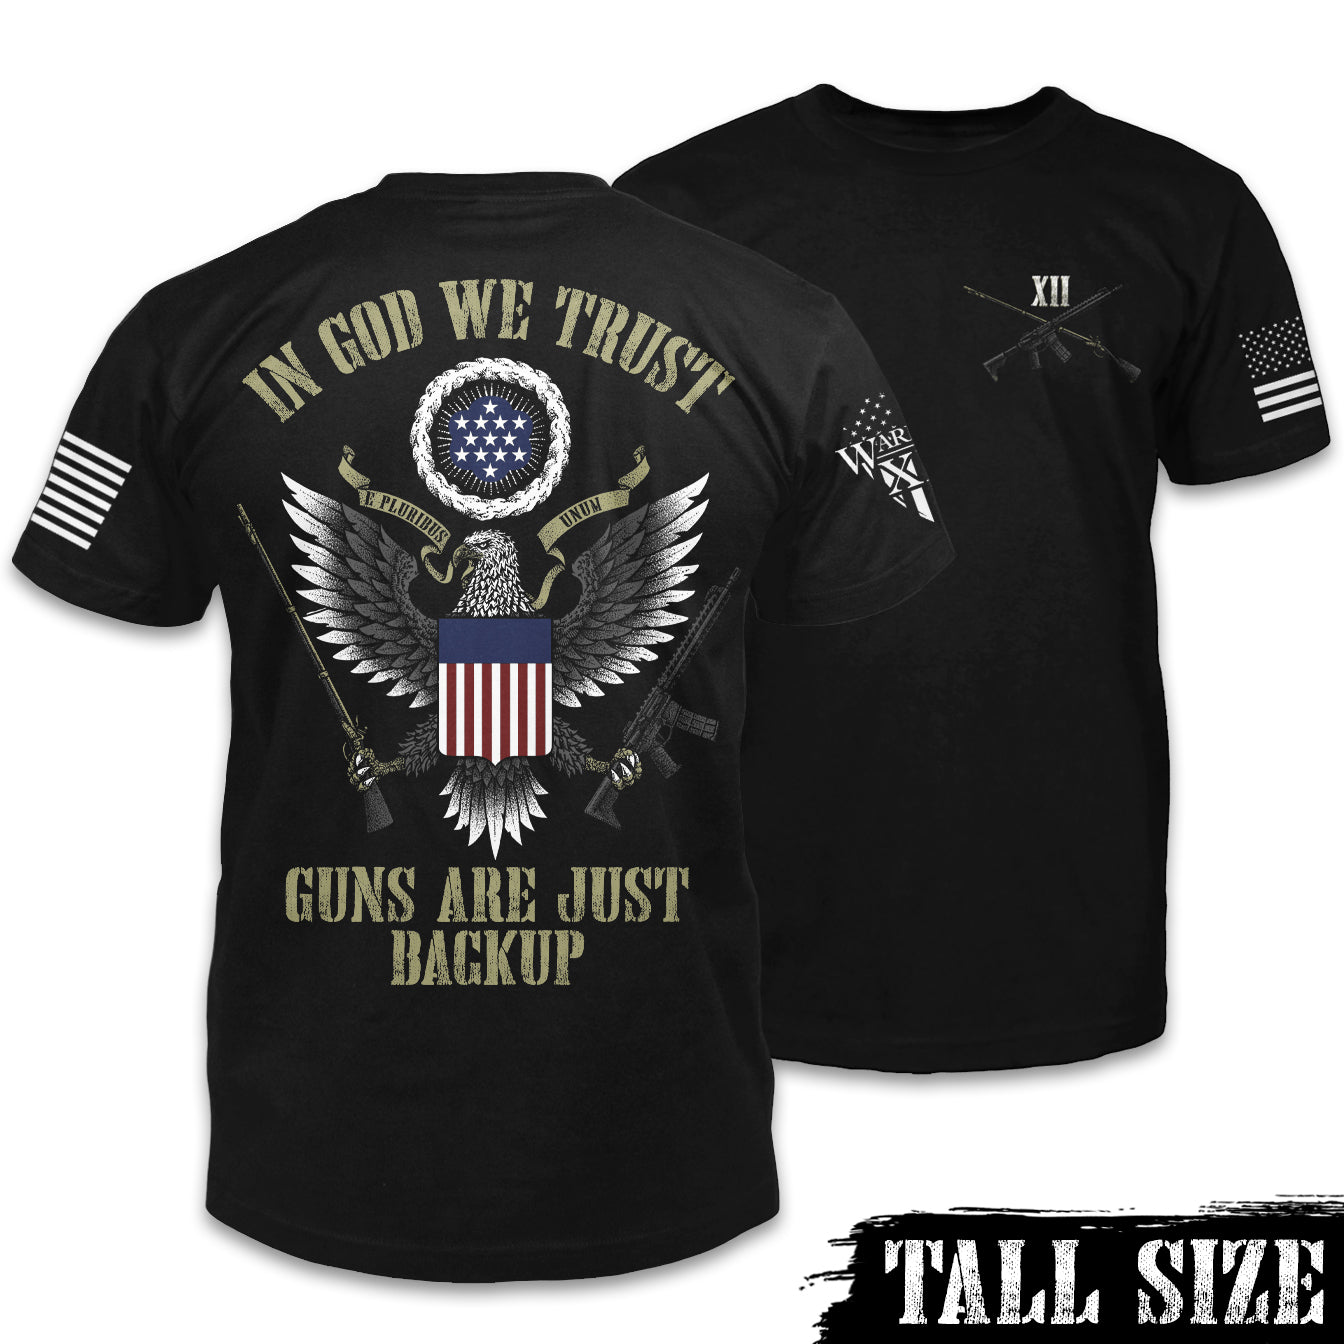 Front & back black tall size shirt with the words "In God we trust, guns are just backup" with an american eagle and the USA flag printed on the shirt.